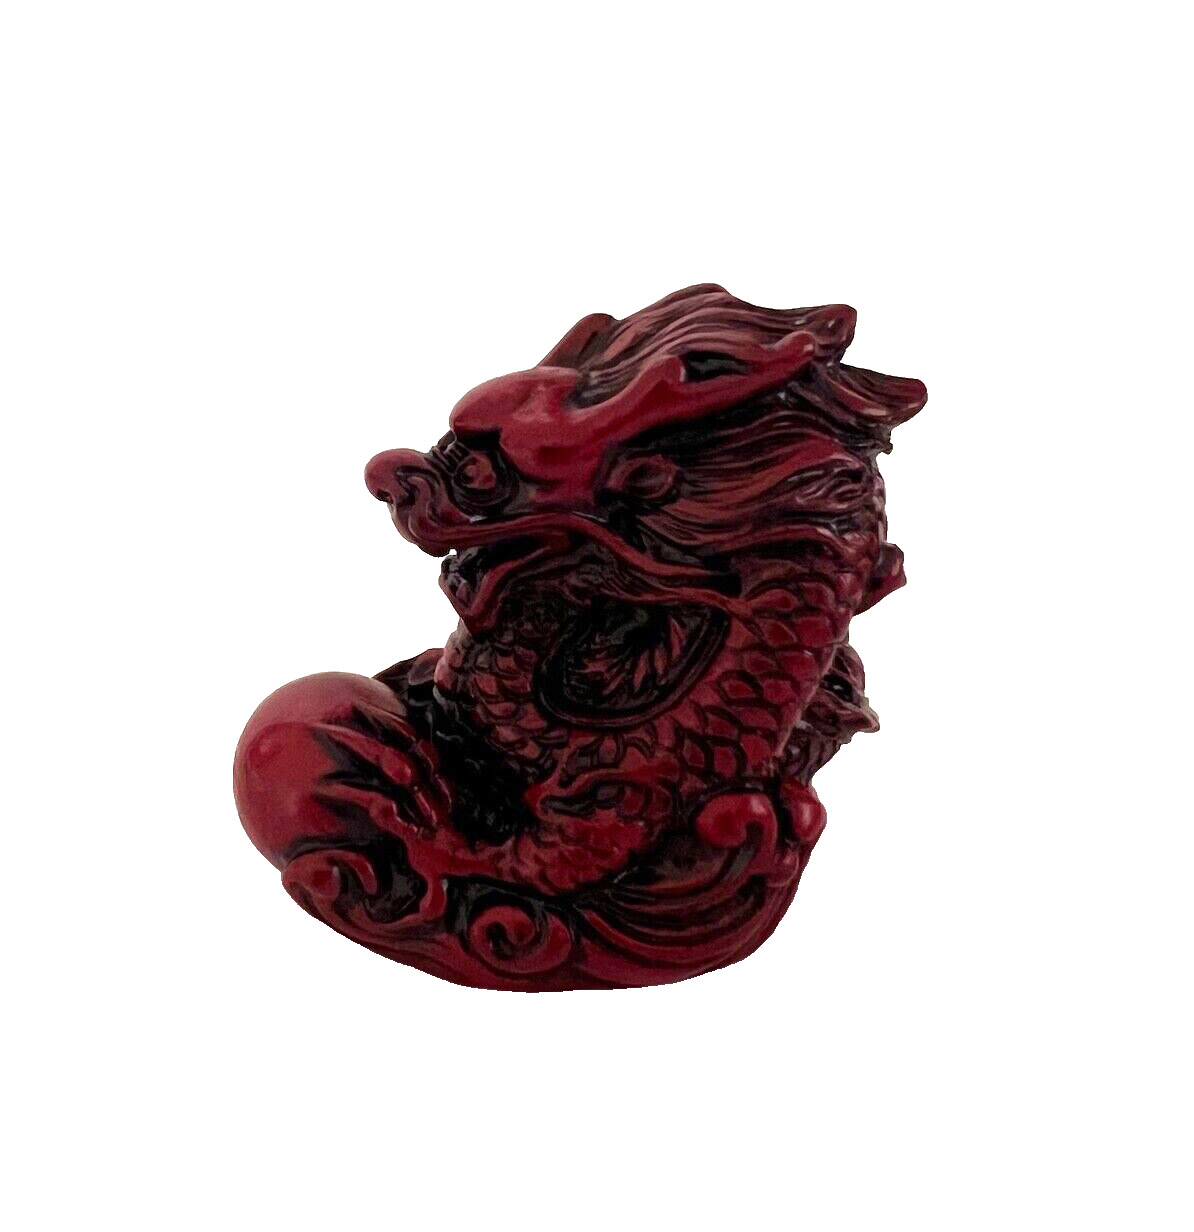 NEW Mini red color  Chinese Feng Shui Dragon Figurine Statue for Luck & Success